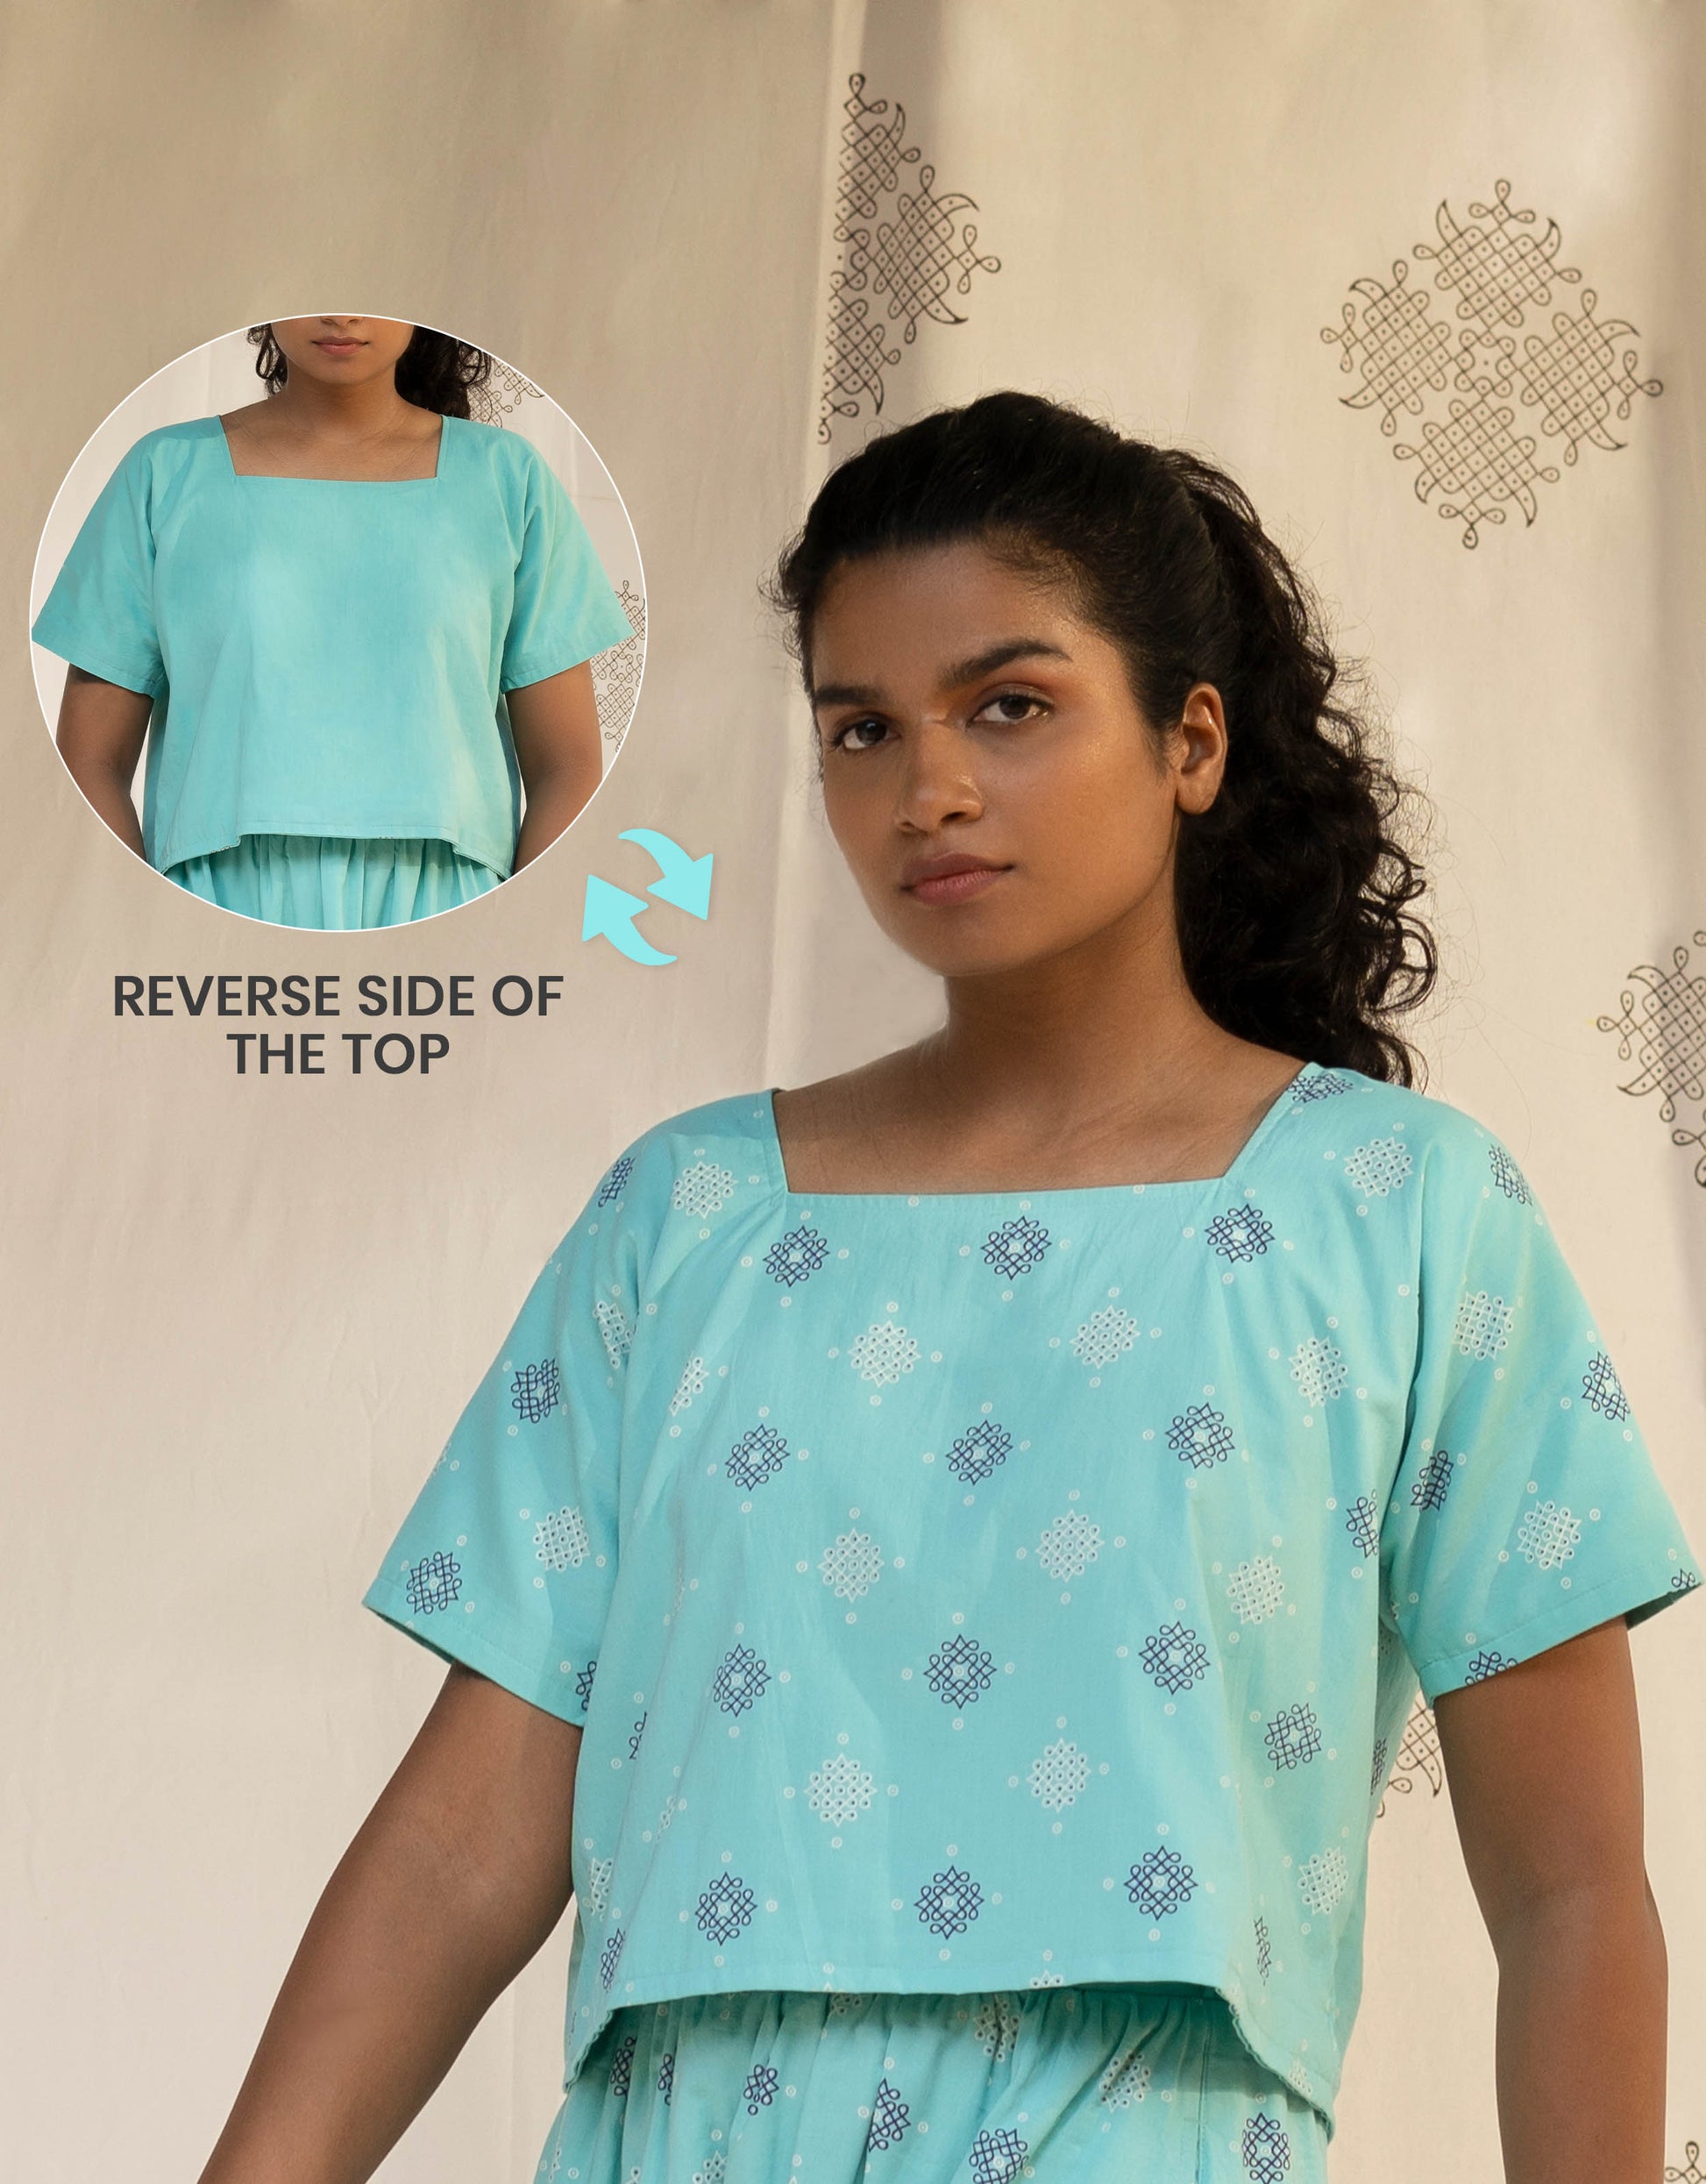 Front view of Hueloom's Reversible Boxy Top in Mint blue Kolam print showing versatile reversible option